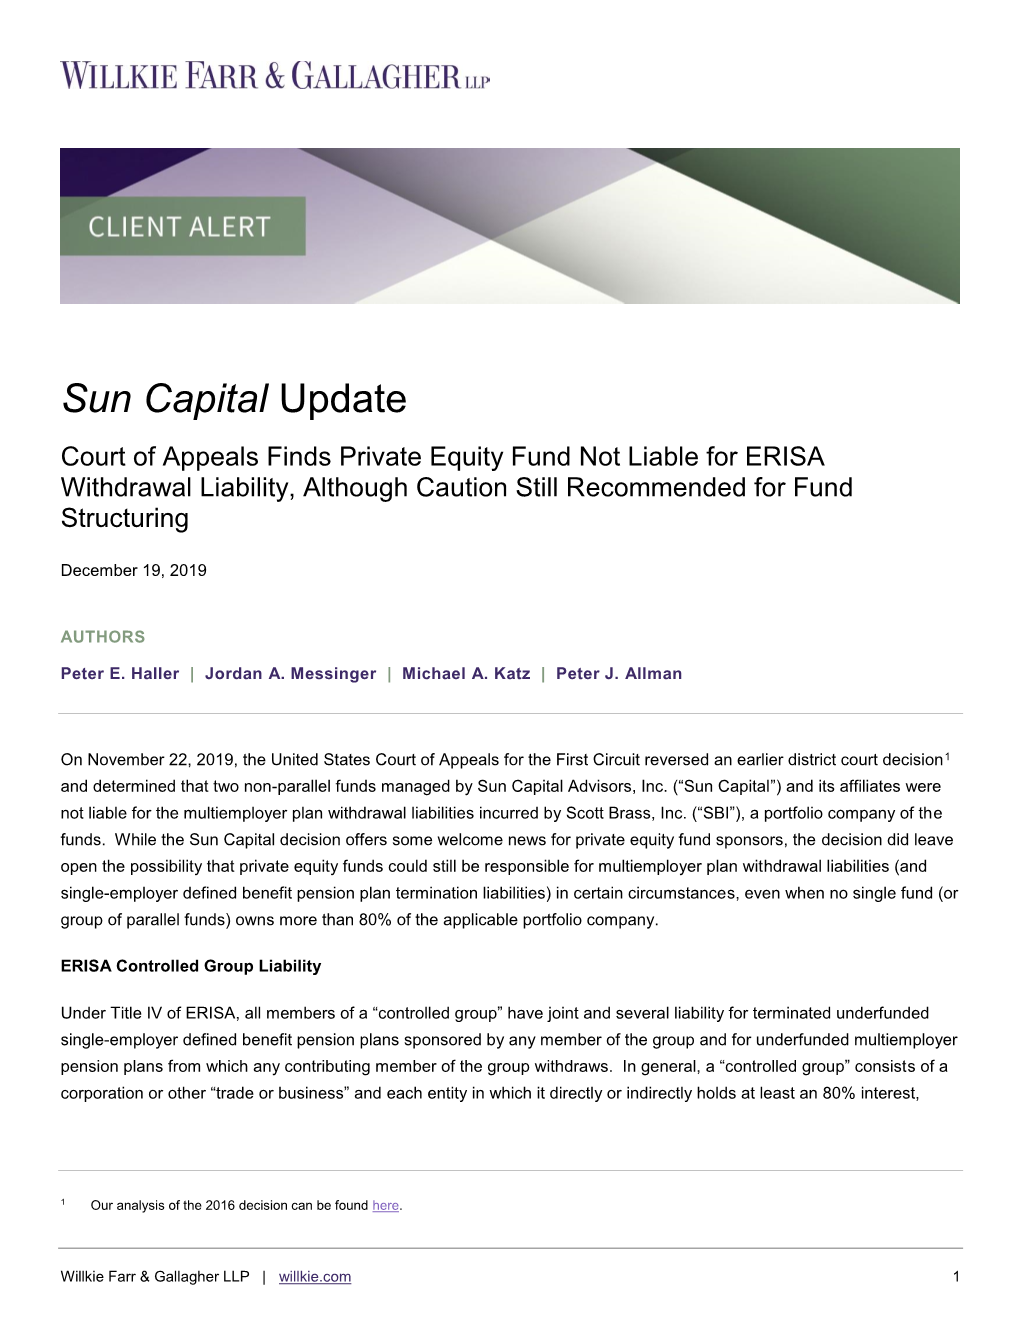 Sun Capital Update Court of Appeals Finds Private Equity Fund Not Liable for ERISA Withdrawal Liability, Although Caution Still Recommended for Fund Structuring